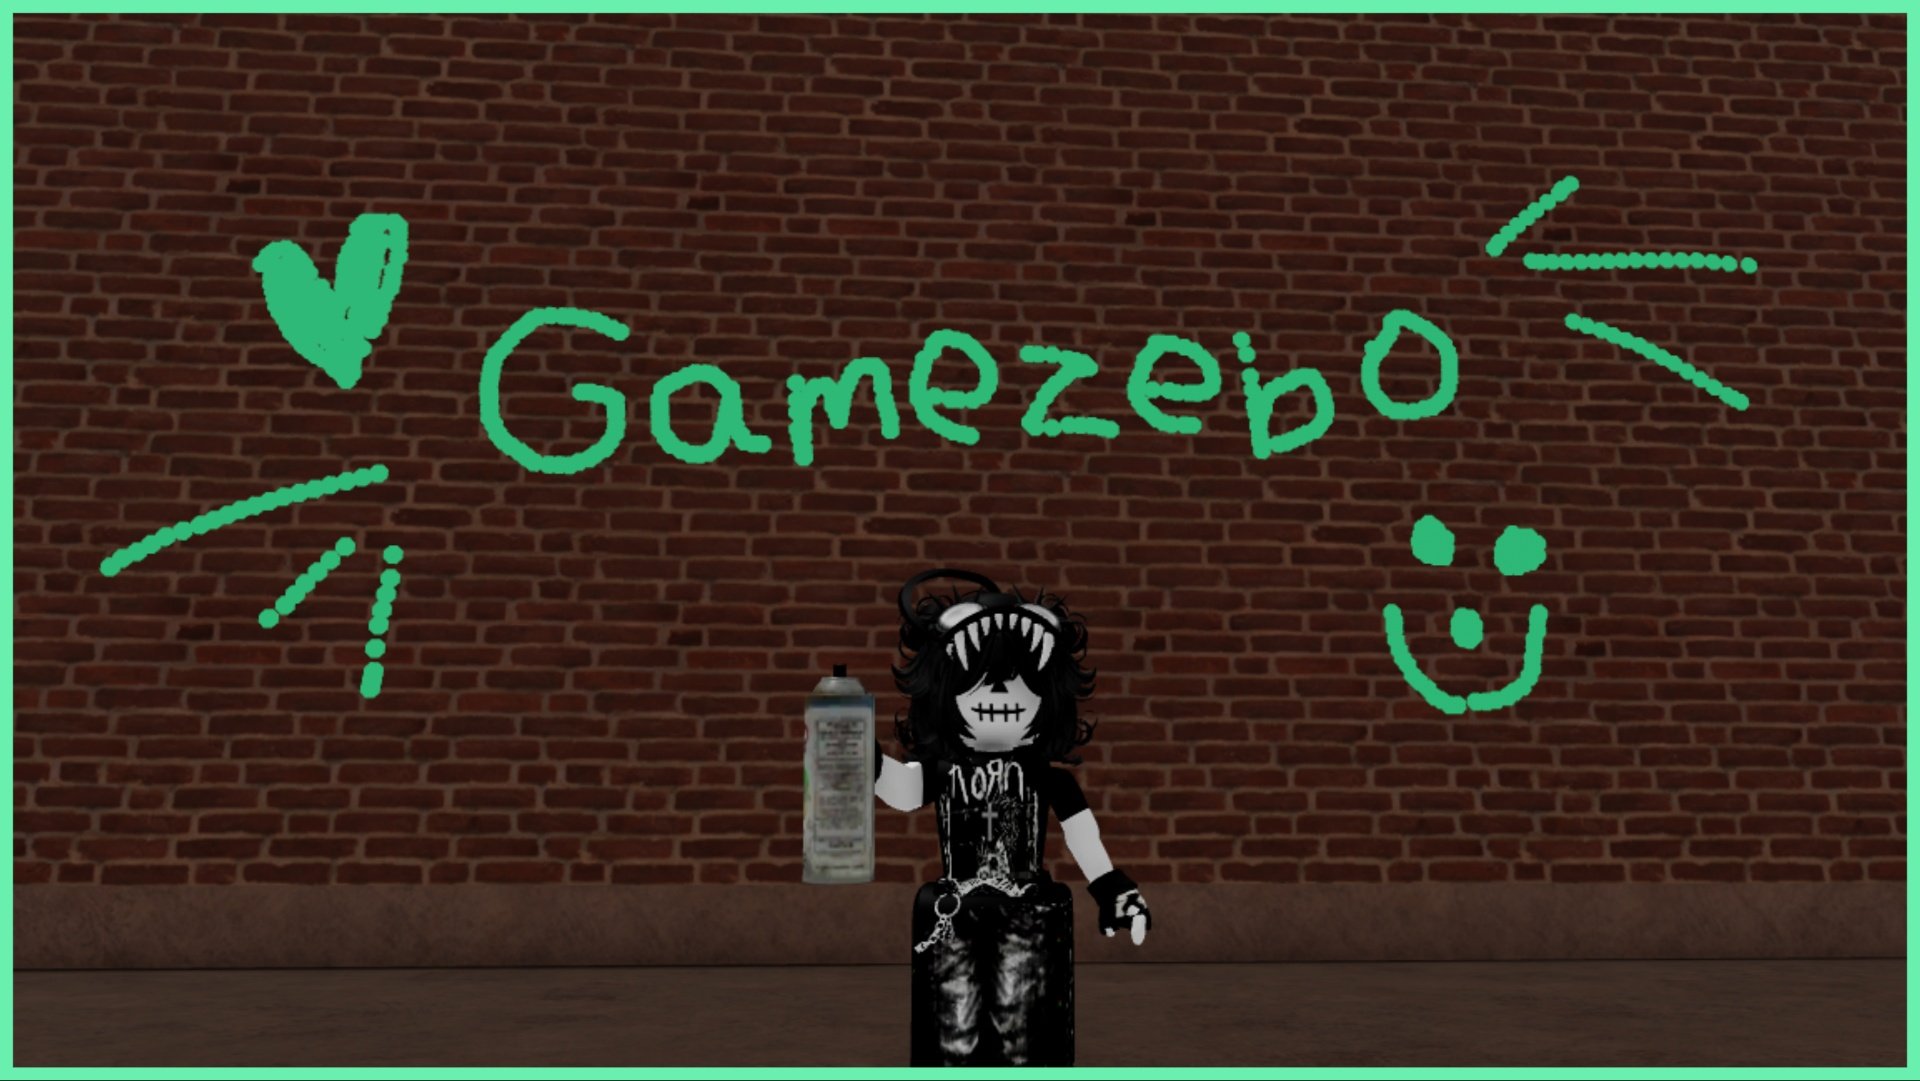 the image shows my avatar stood before a brick wall with a green spray paint mural behind her which says "Gamezebo" with a series of hearts, sparks and a smiley face.